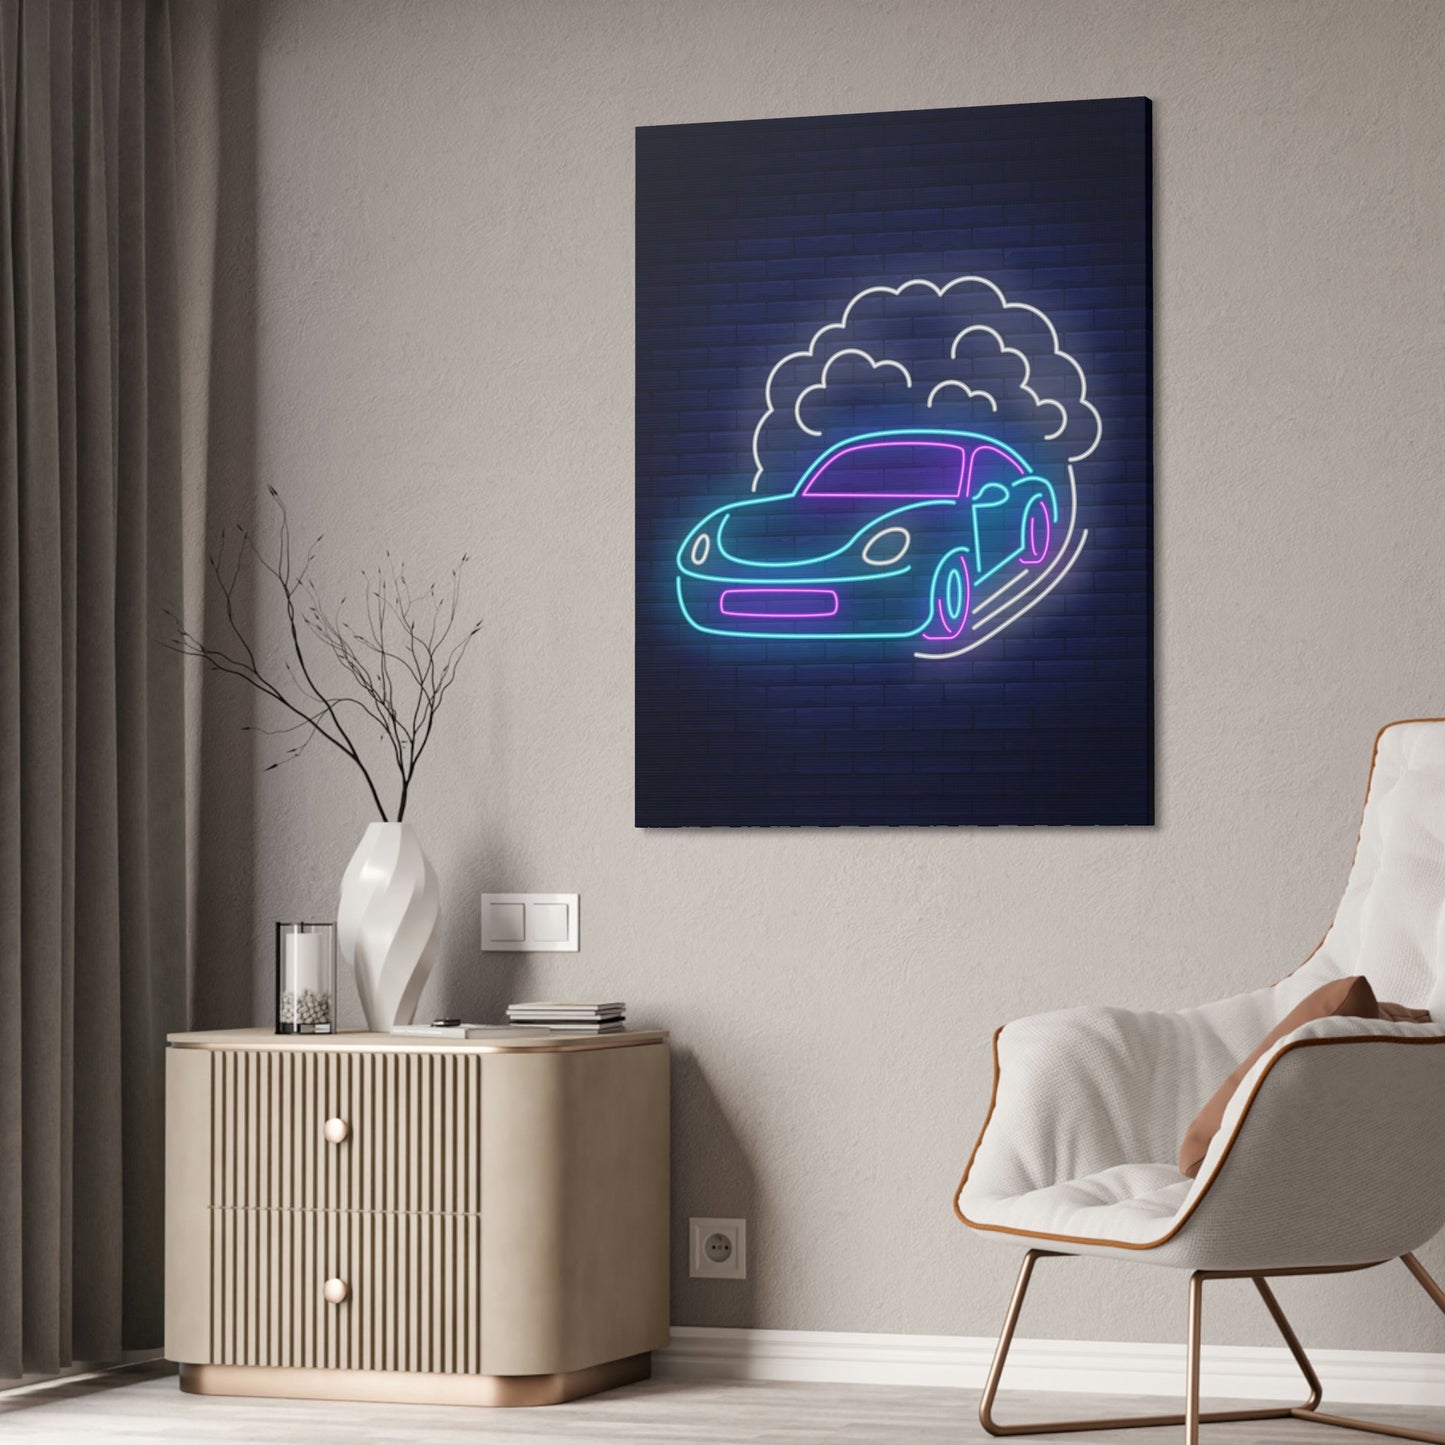 Luminous Landscapes Awakened: Neon-inspired Canvas Prints for Striking Wall Decor